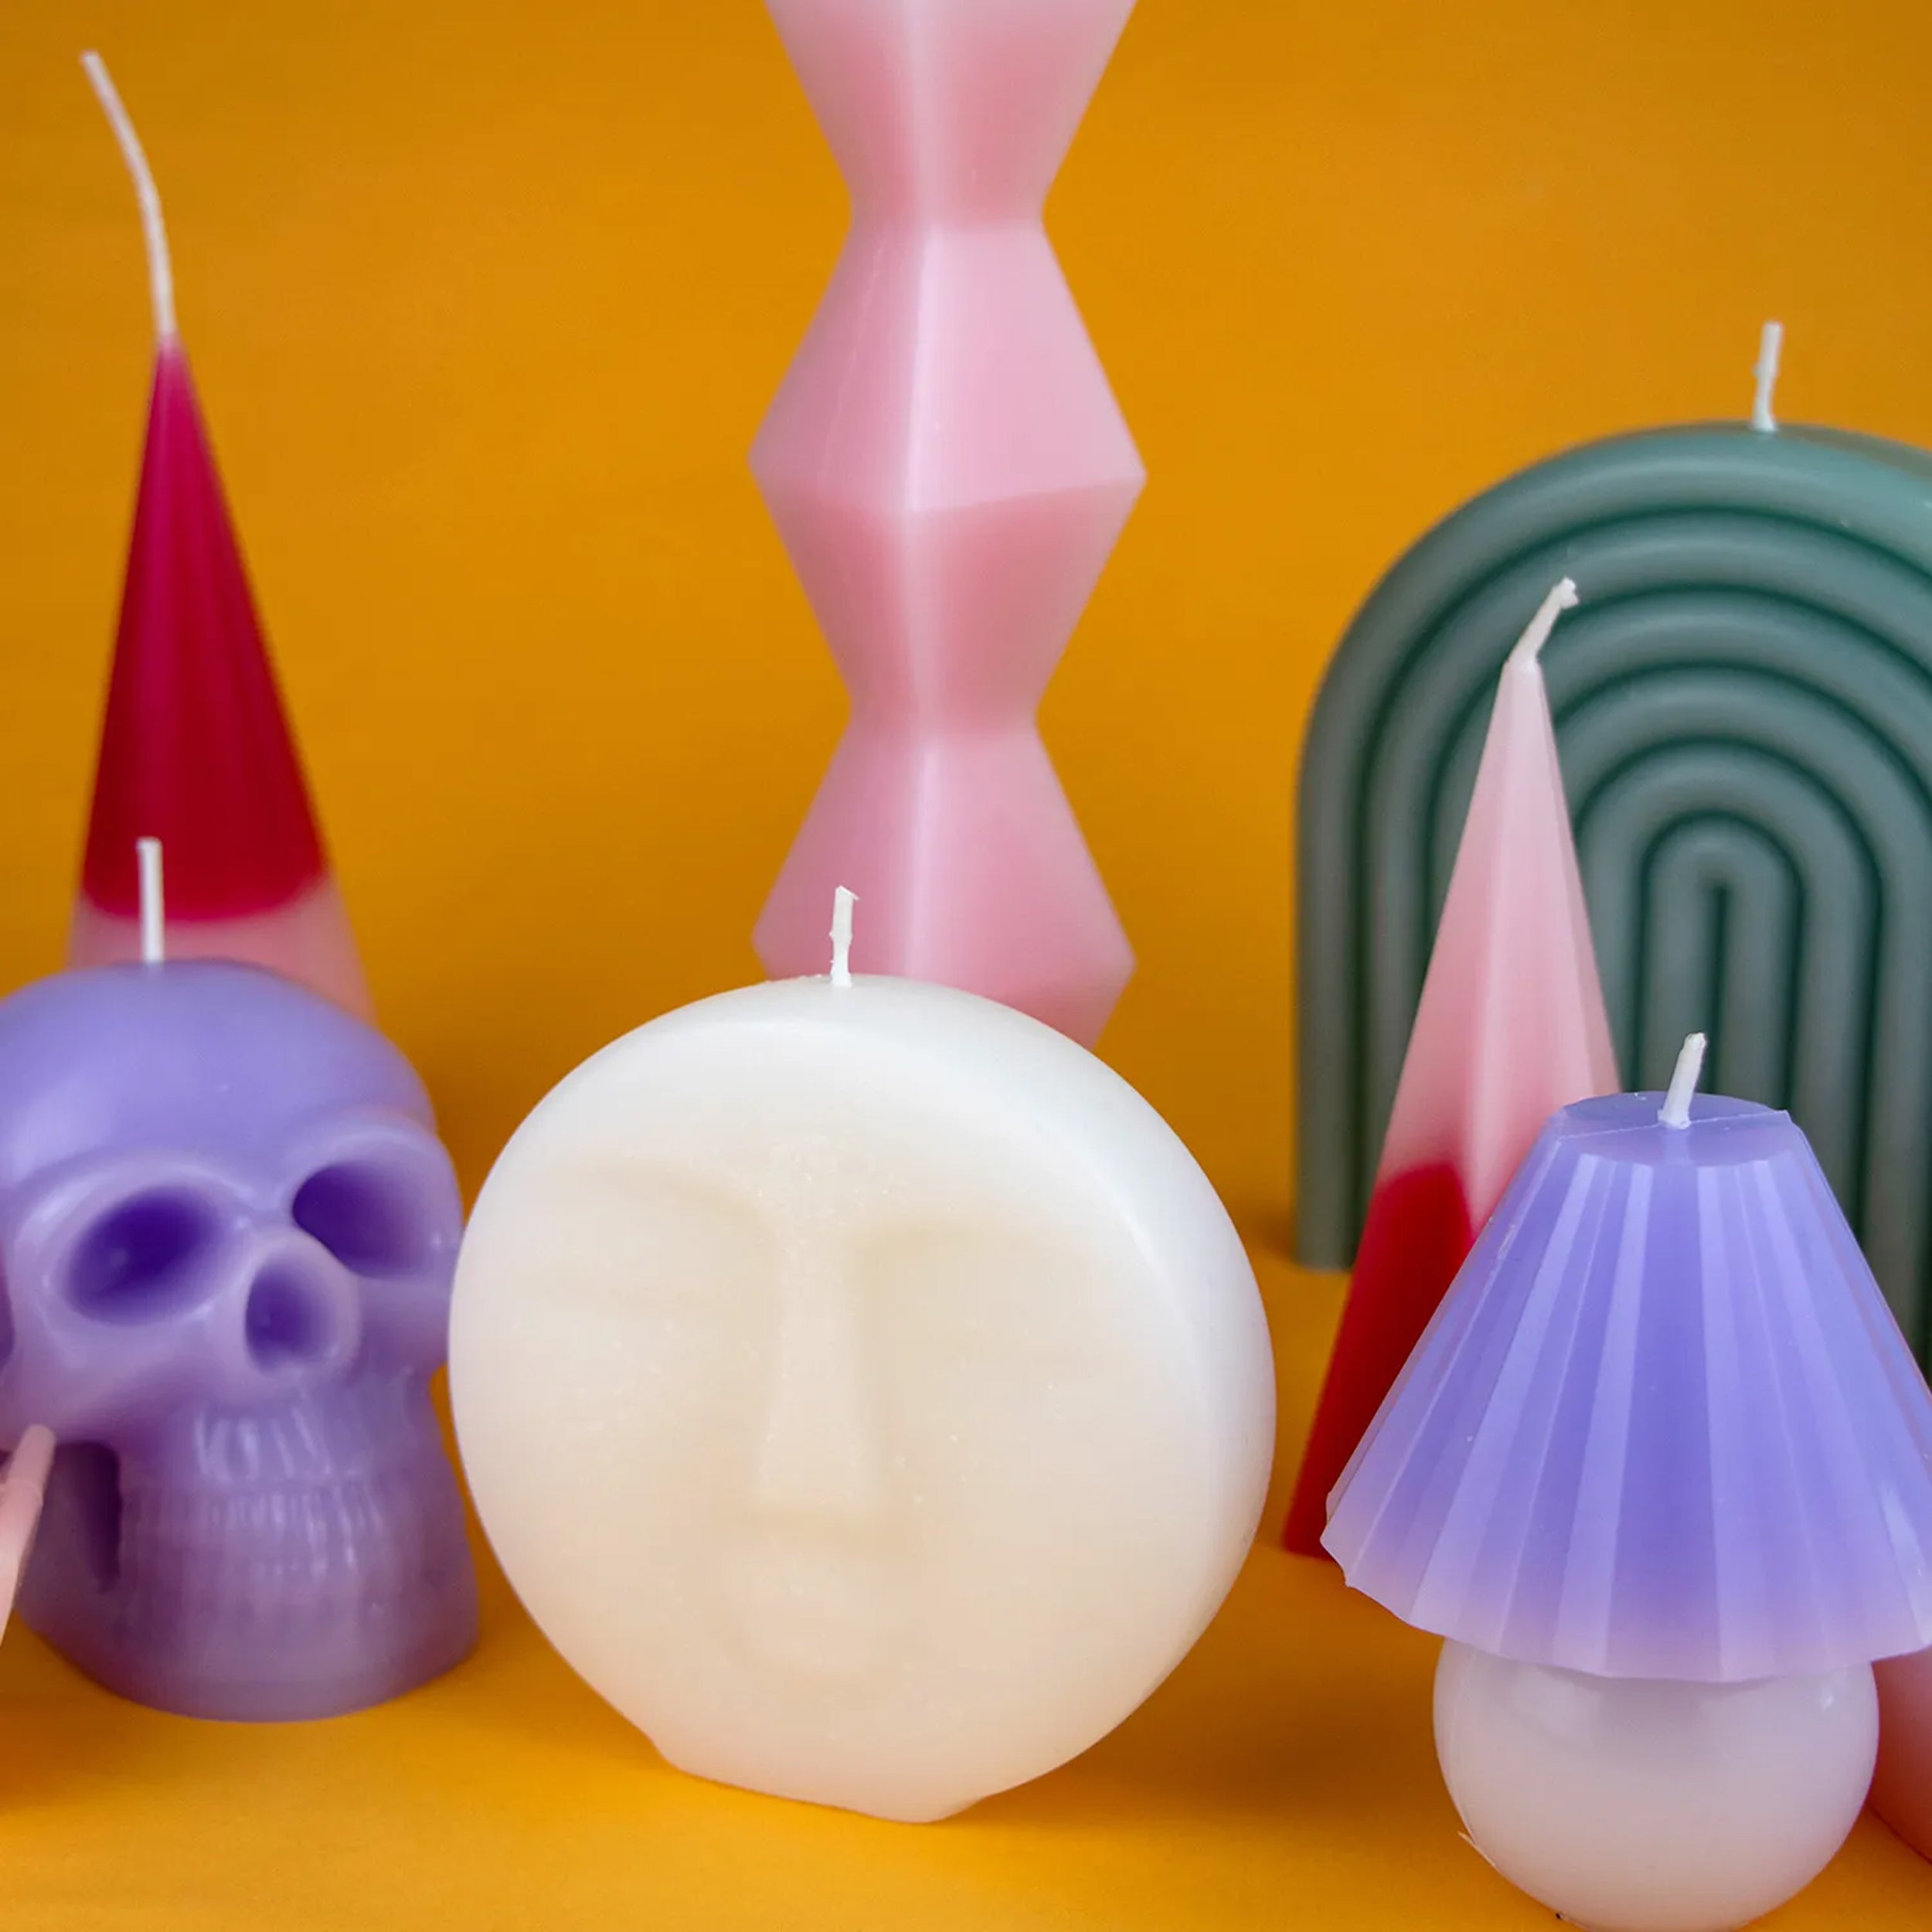 Handmade Skeleton Candles for Halloween Festival Décor and Aromatherapy